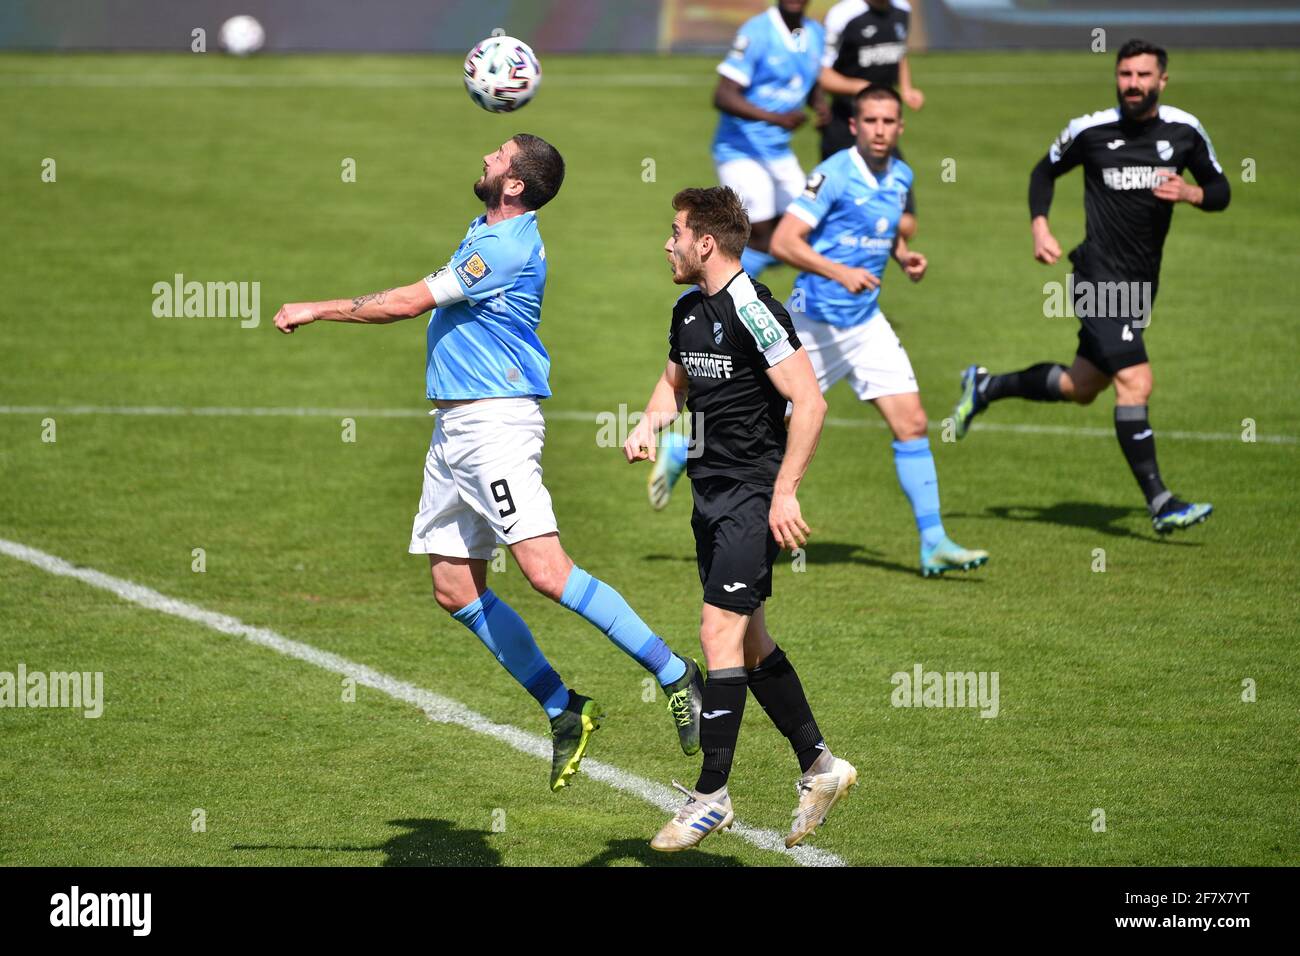 Sascha MOELDERS (TSV Munich 1860) on the ball, action. Soccer 3rd league, Liga3, TSV Munich 1860 - SC Verl on April 10th, 2021 in Muenchen GRUENWALDER STADION. DFL REGULATIONS PROHIBIT ANY USE OF PHOTOGRAPHS AS IMAGE SEQUENCES AND / OR QUASI-VIDEO. | usage worldwide Stock Photo